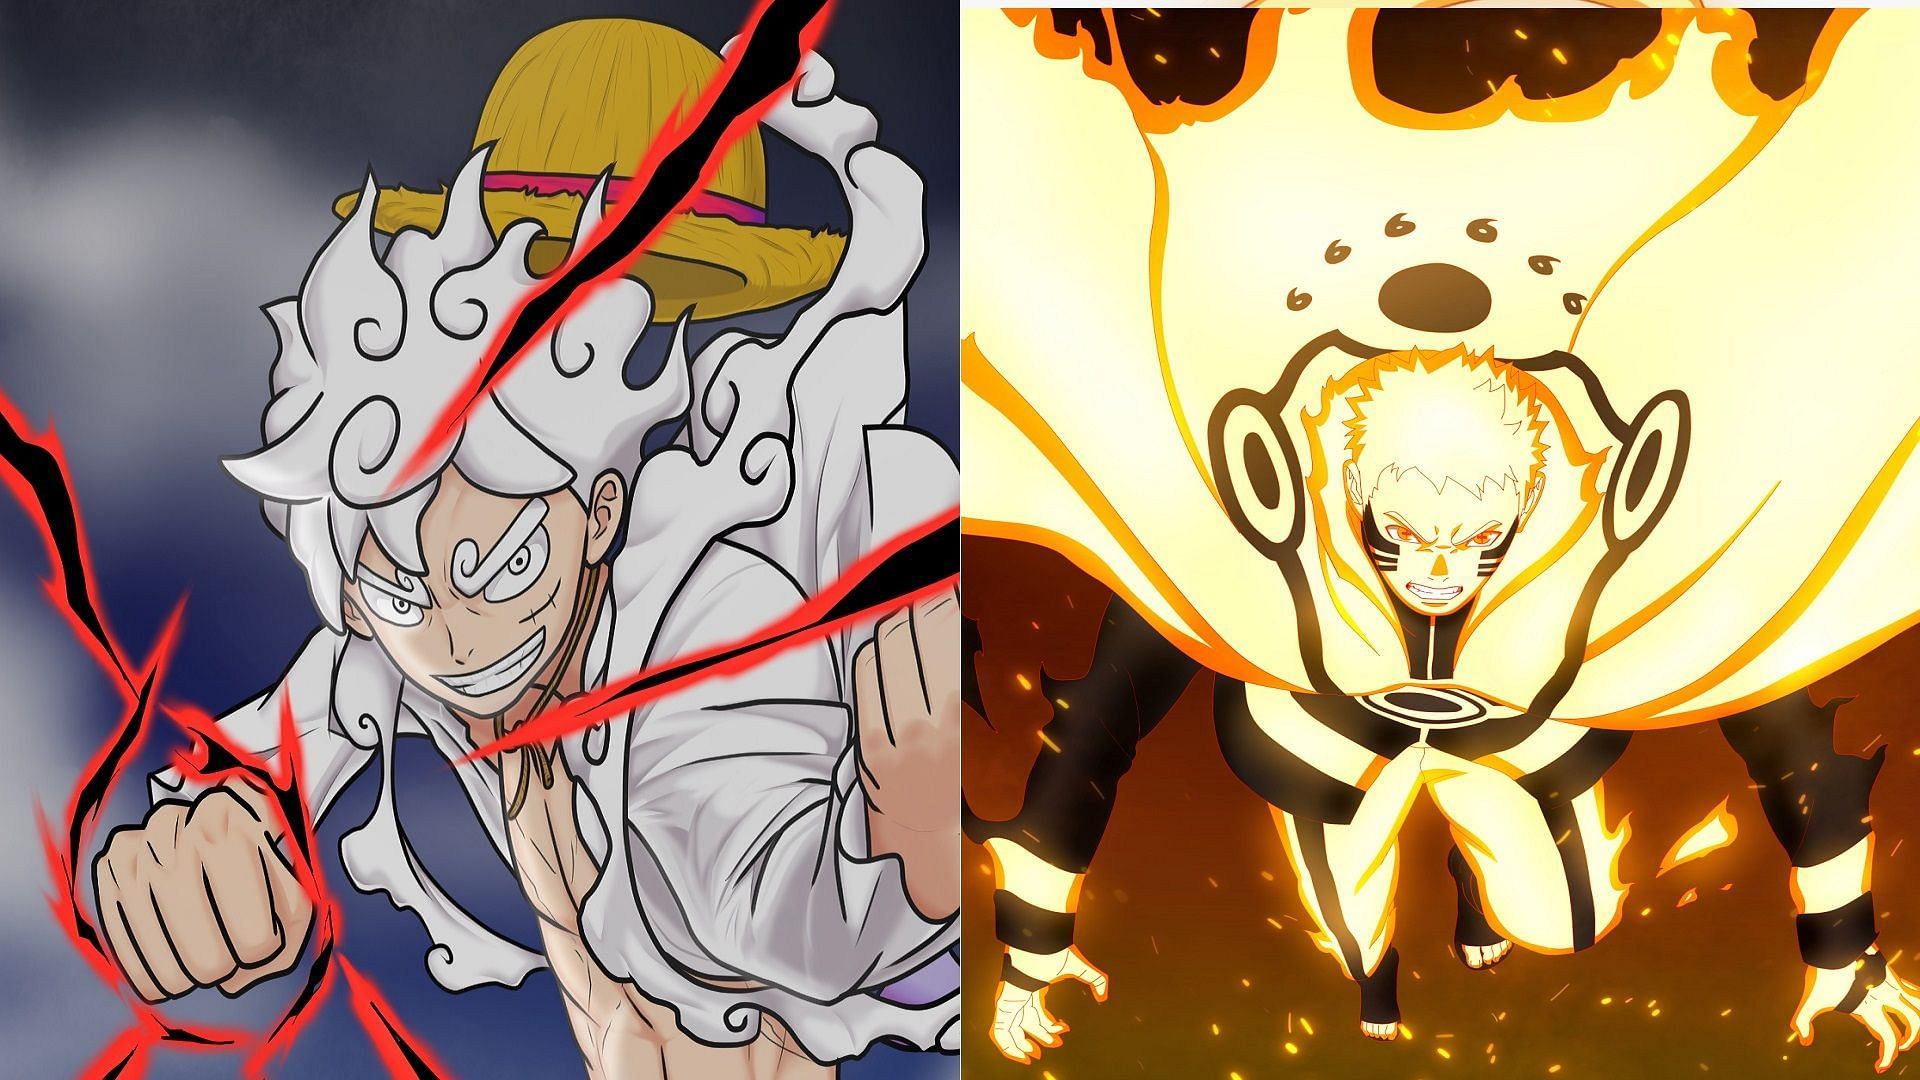 Is Luffy Stronger Than Naruto?